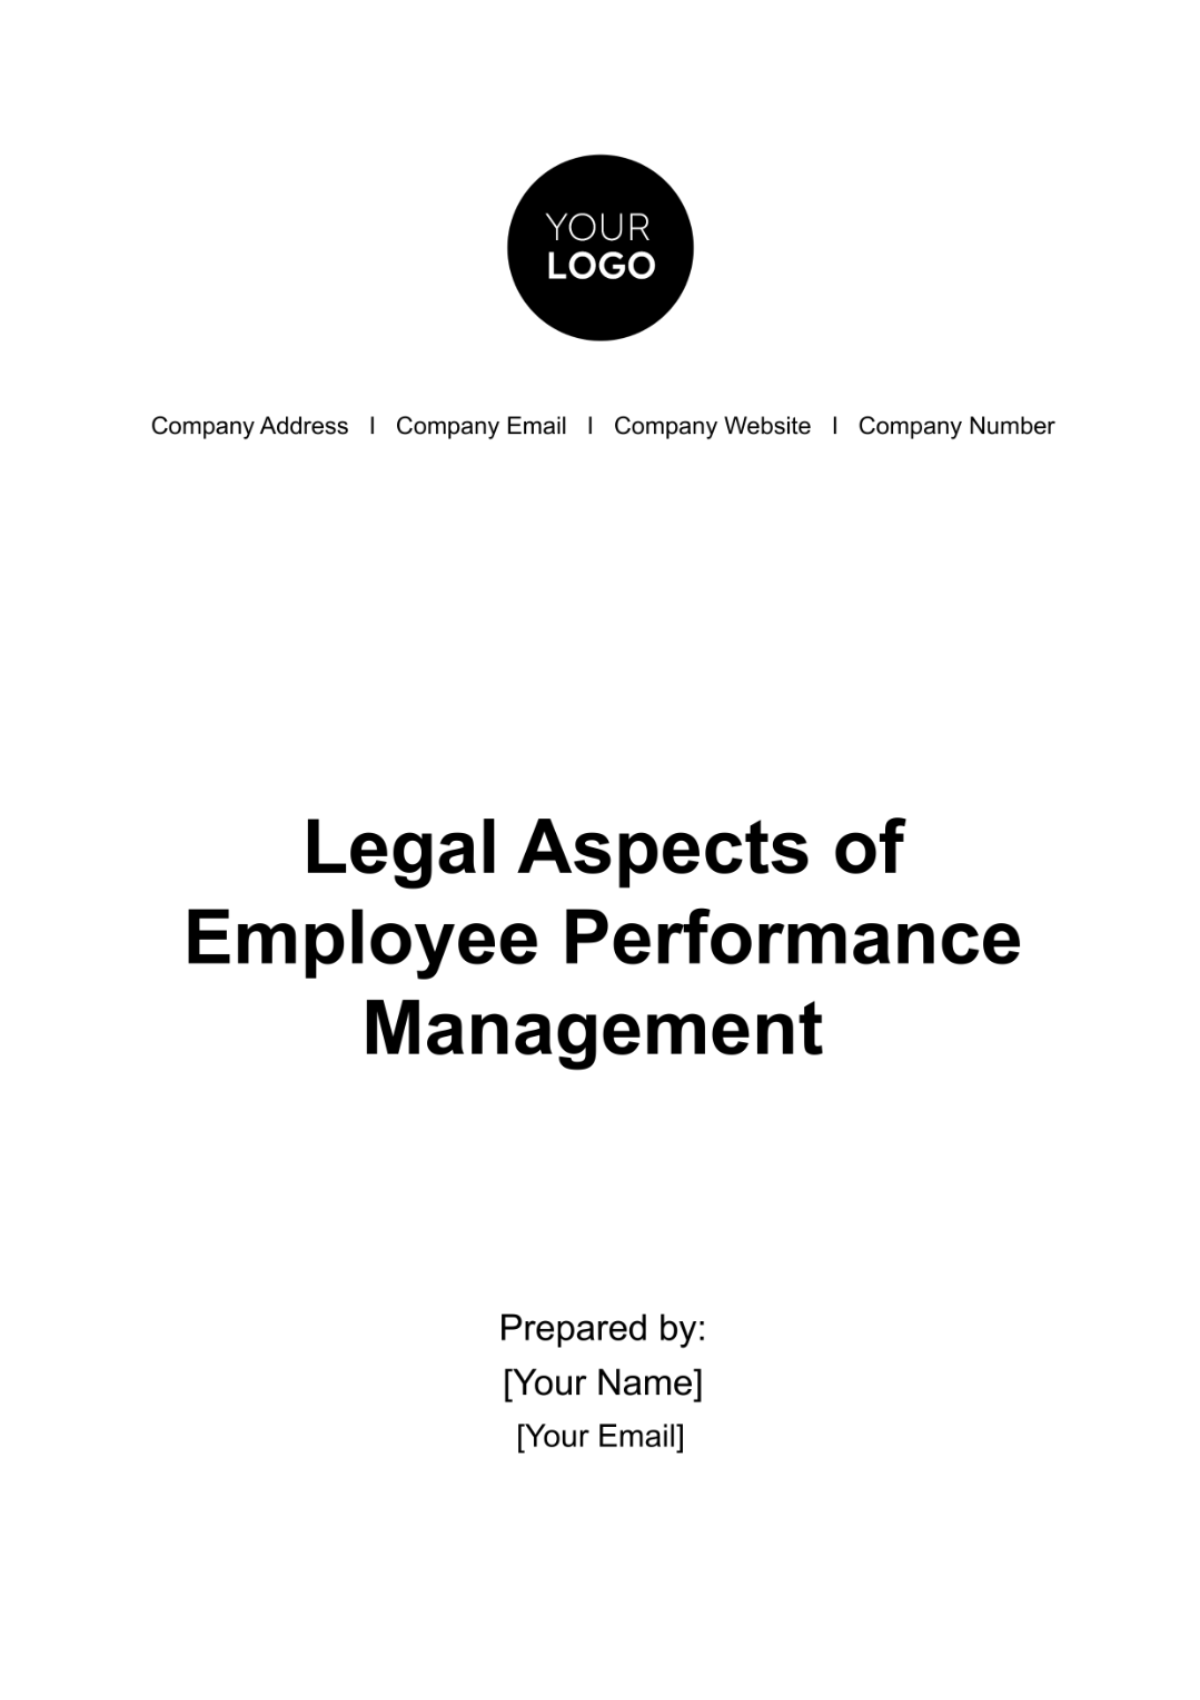 Free Legal Aspects of Employee Performance Management HR Template